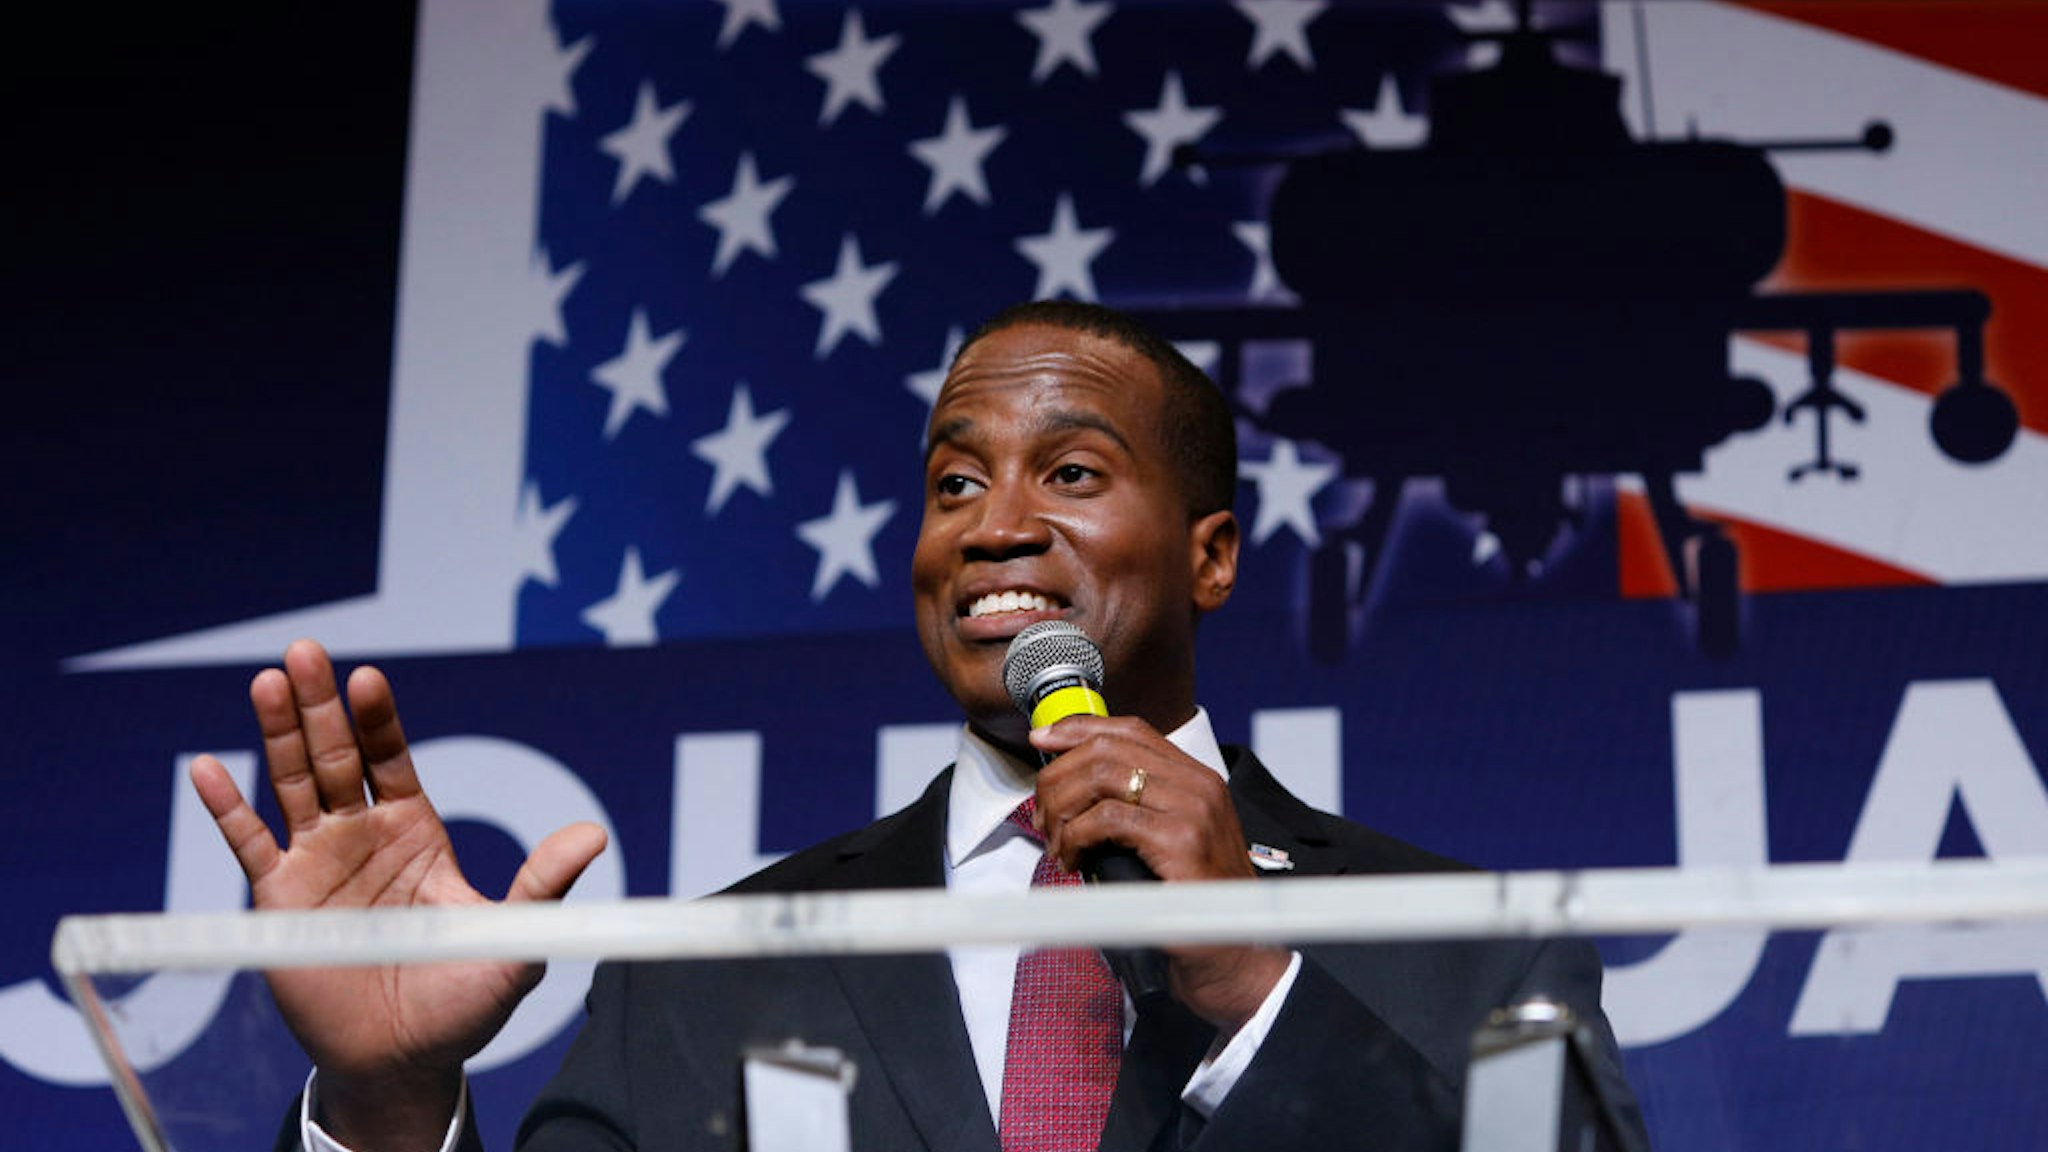 John James, Michigan GOP Senate candidate, speaks at an election night event after winning his primary election at his business